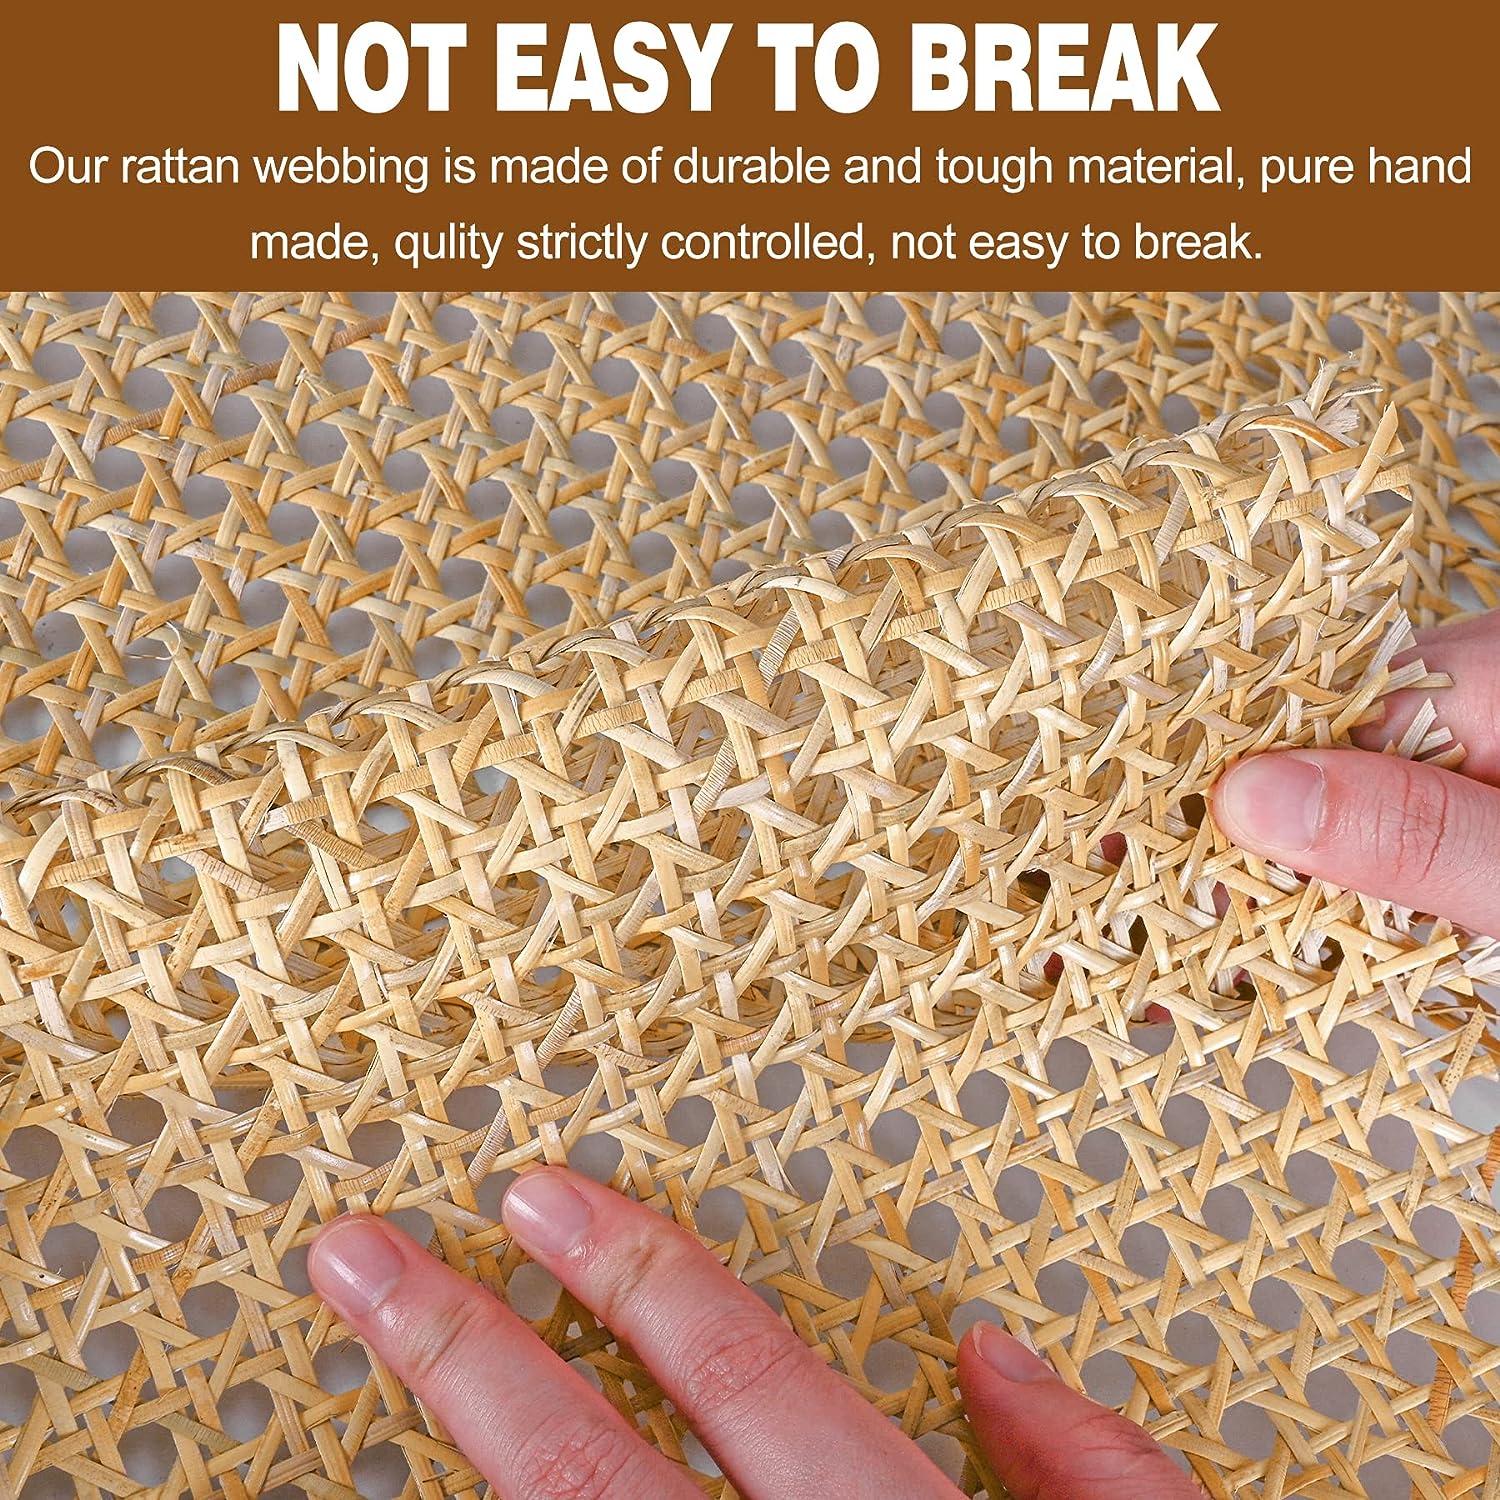 18 Width Rattan Pressed Cane Webbing Sheet for Caning Projects 3.3FT  Natural Rattan Material Roll Net Woven Open Mesh Cane Suitable for Caning  Material DIY Supplies 18W x 40 L(3.3Ft)